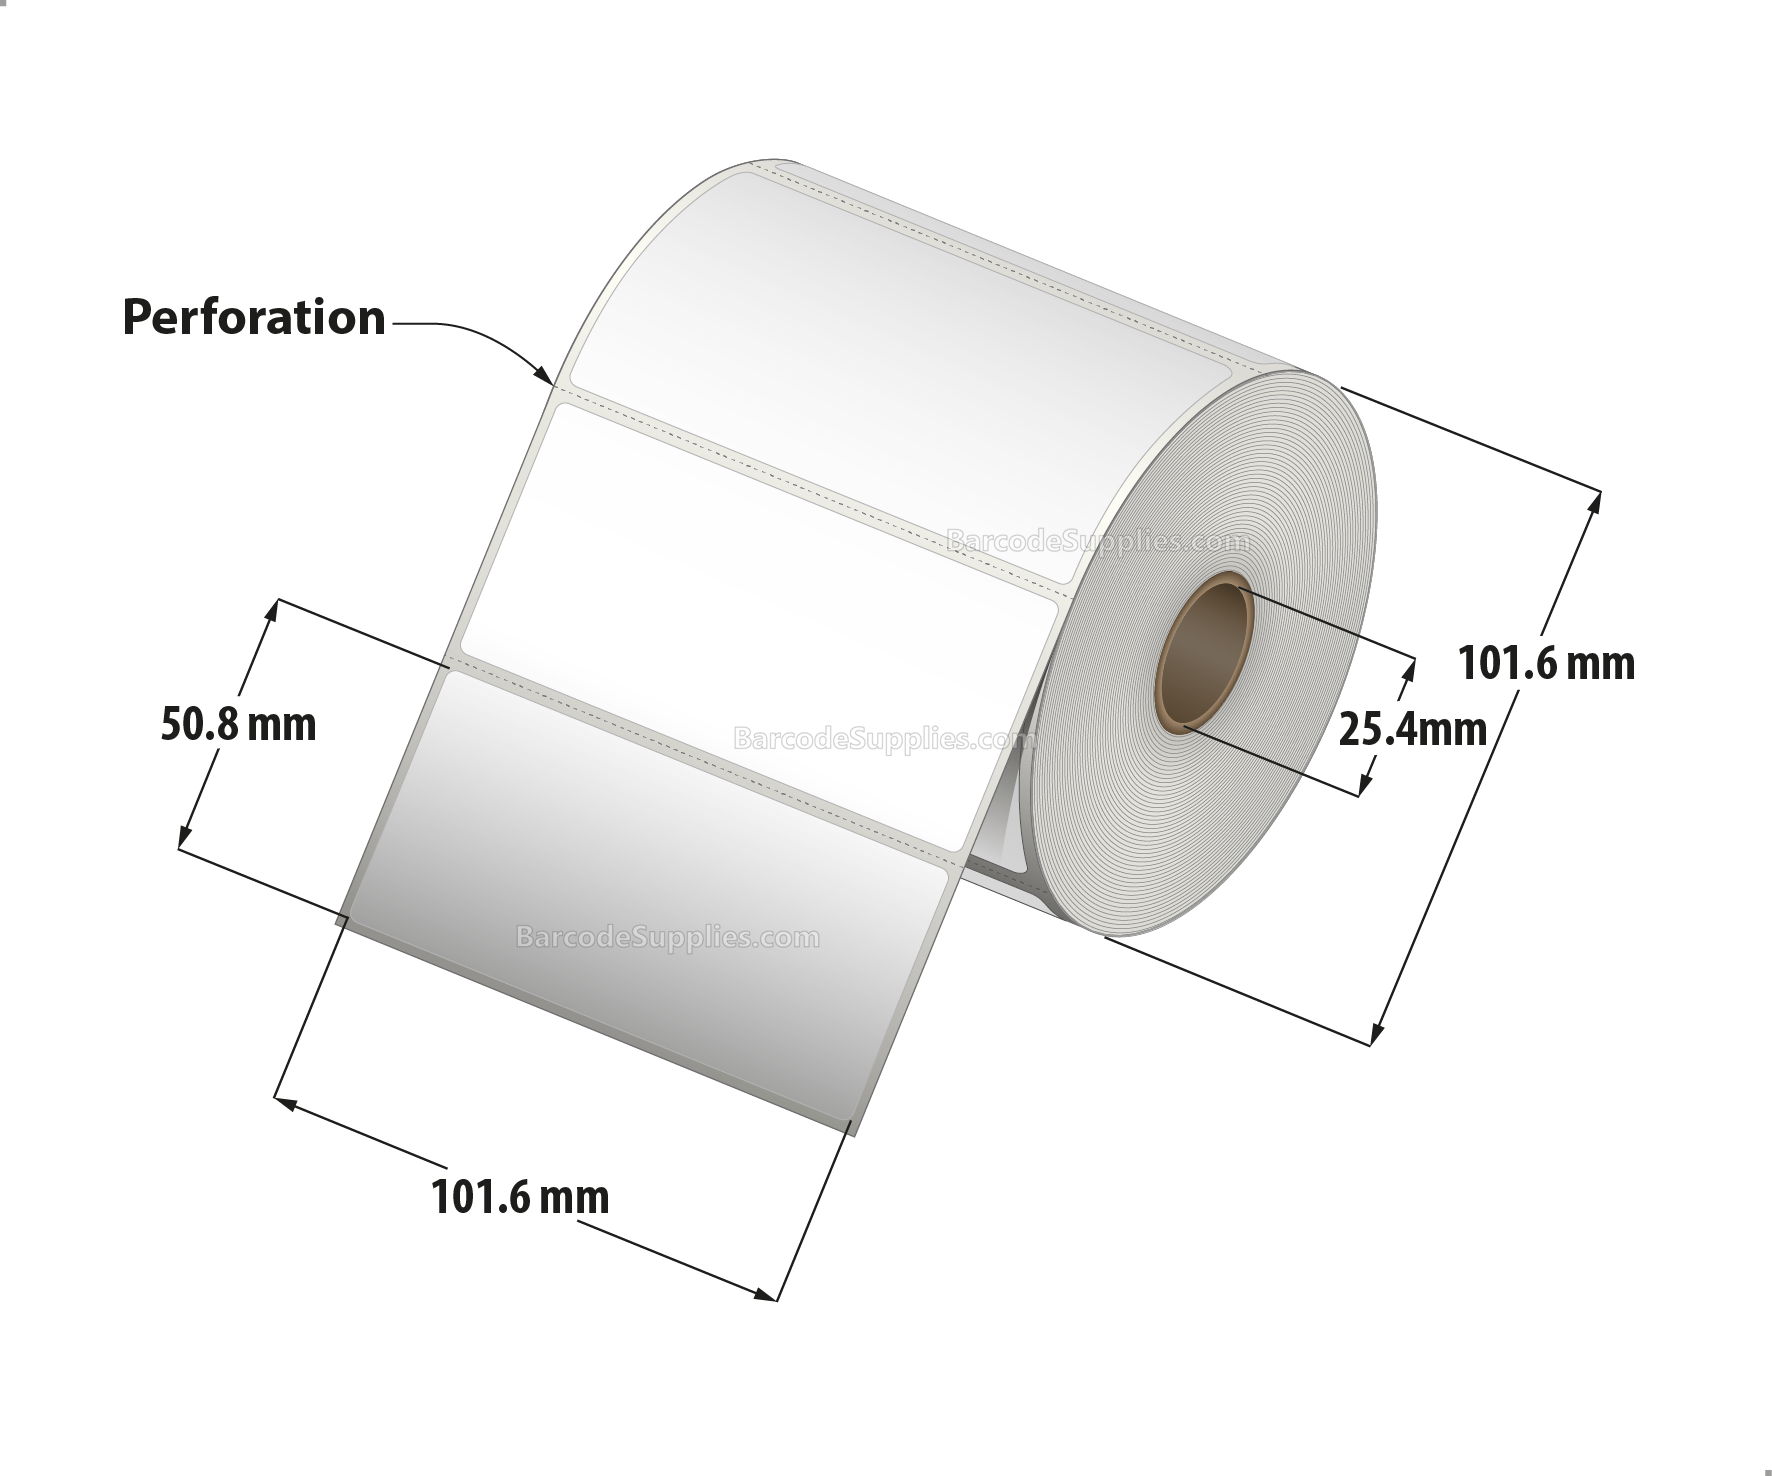 4 x 2 Direct Thermal White Labels With Permanent Acrylic Adhesive - Perforated - 735 Labels Per Roll - Carton Of 4 Rolls - 2940 Labels Total - MPN: DT42-14PDT